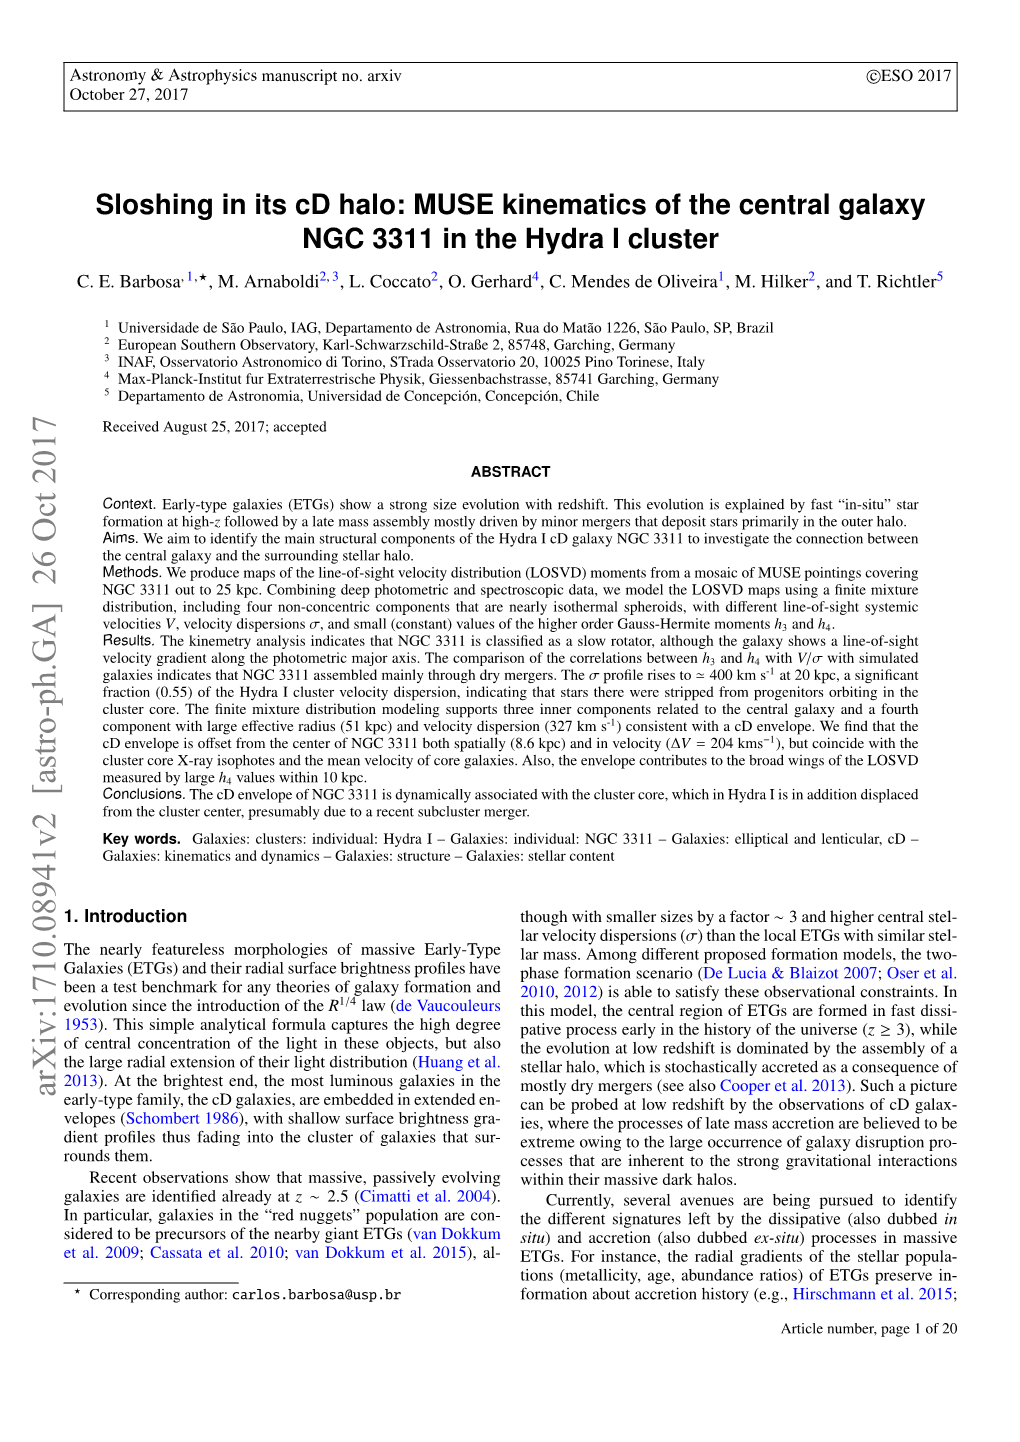 MUSE Kinematics of the Central Galaxy NGC 3311 in the Hydra I Cluster C